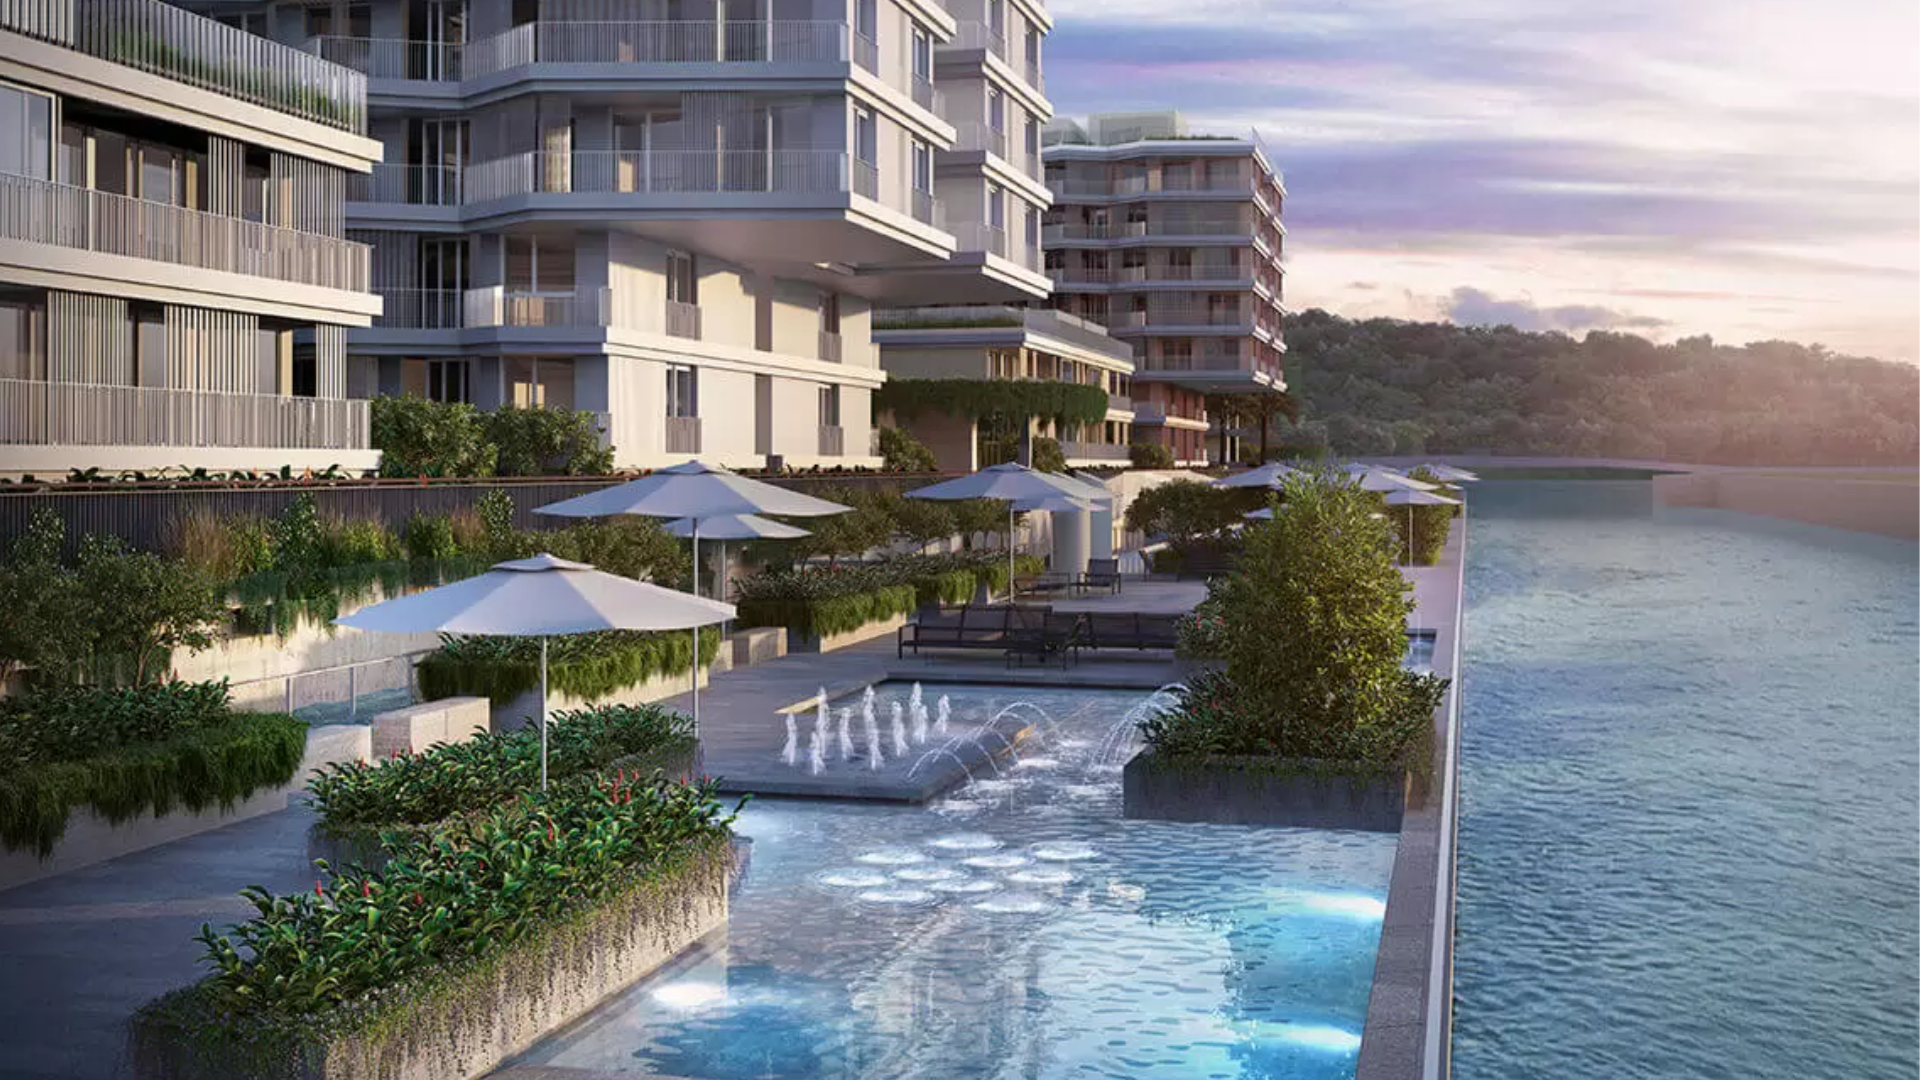 The Reef at King's Dock Singapore luxury apartments pool